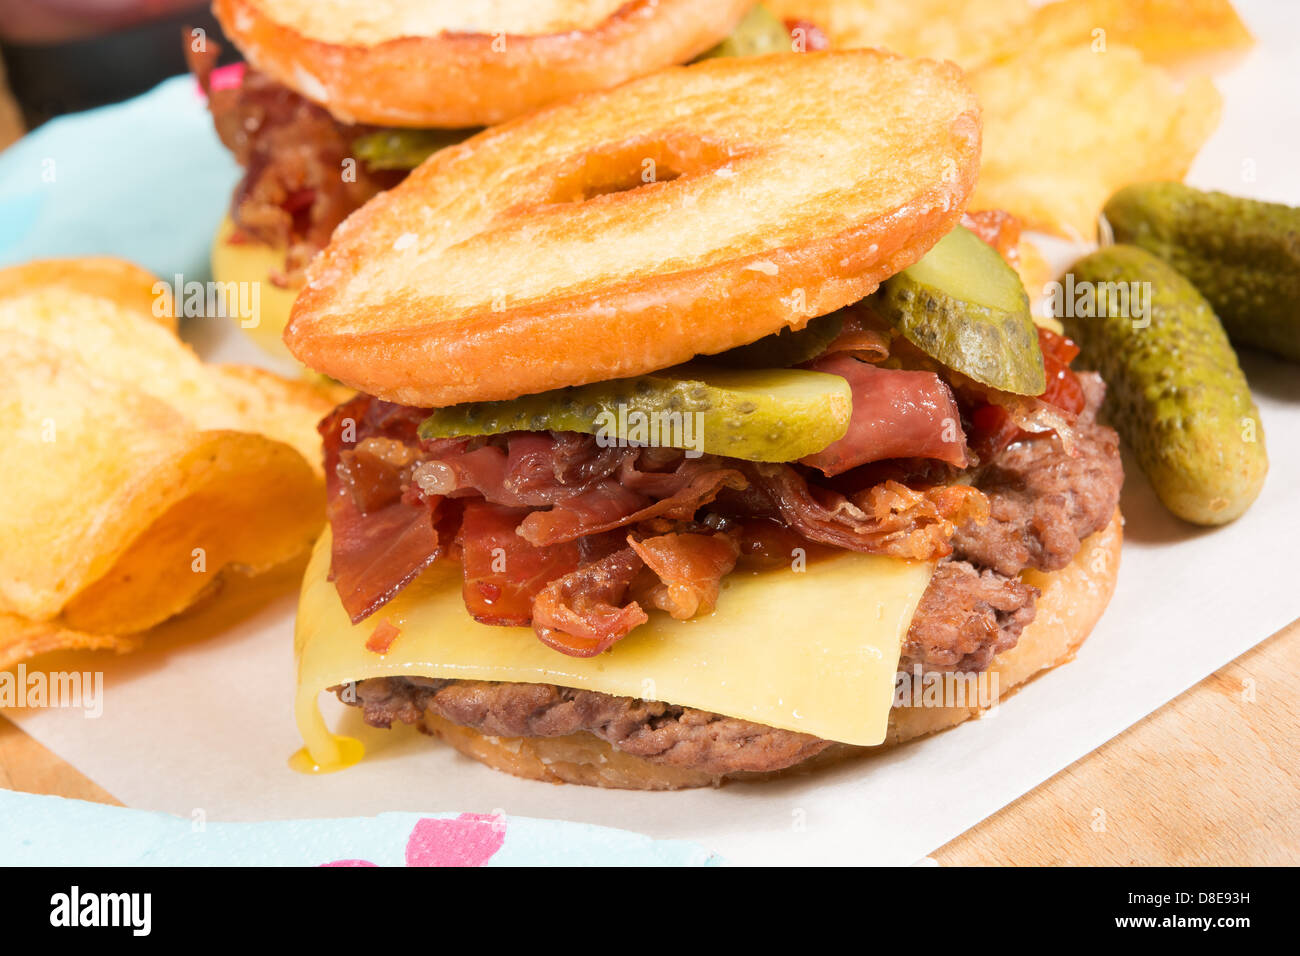 The artery-clogging Luther burger: a beef patty, cheese, crispy bacon and gherkins between two halves of a glazed ring doughnut. Stock Photo